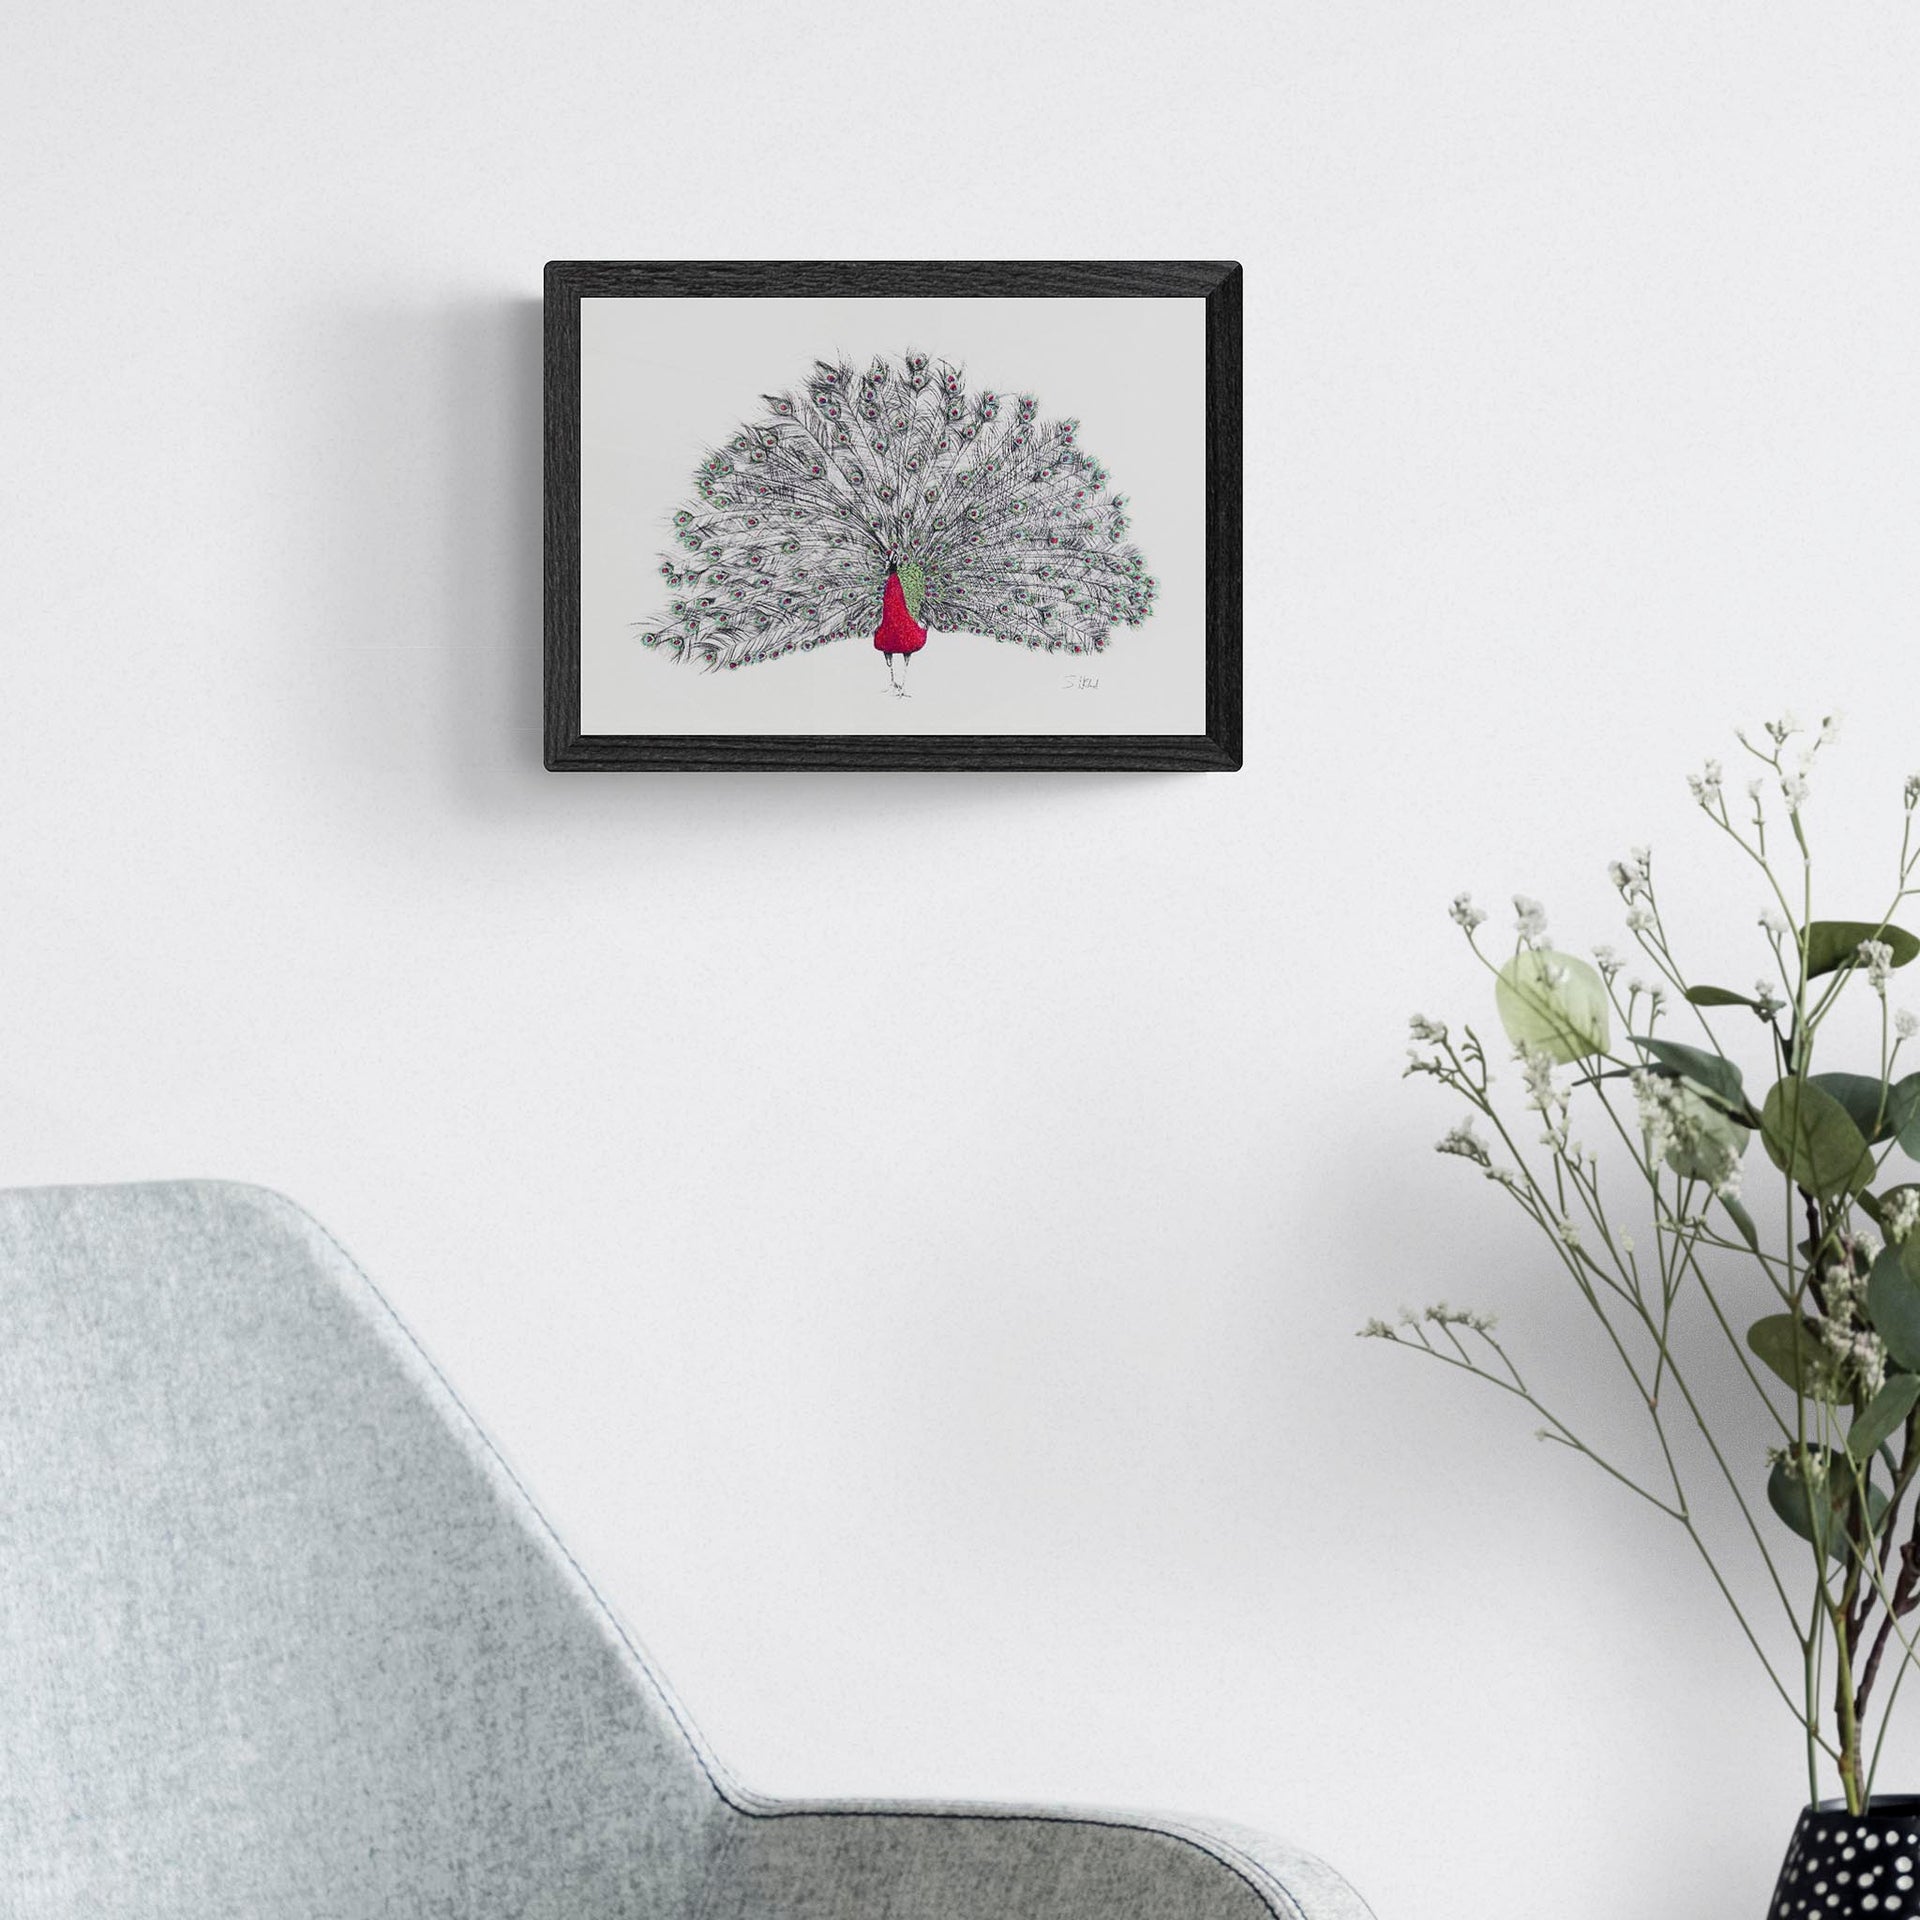 Peacock hand embroidered limited edition print in black frame on the wall